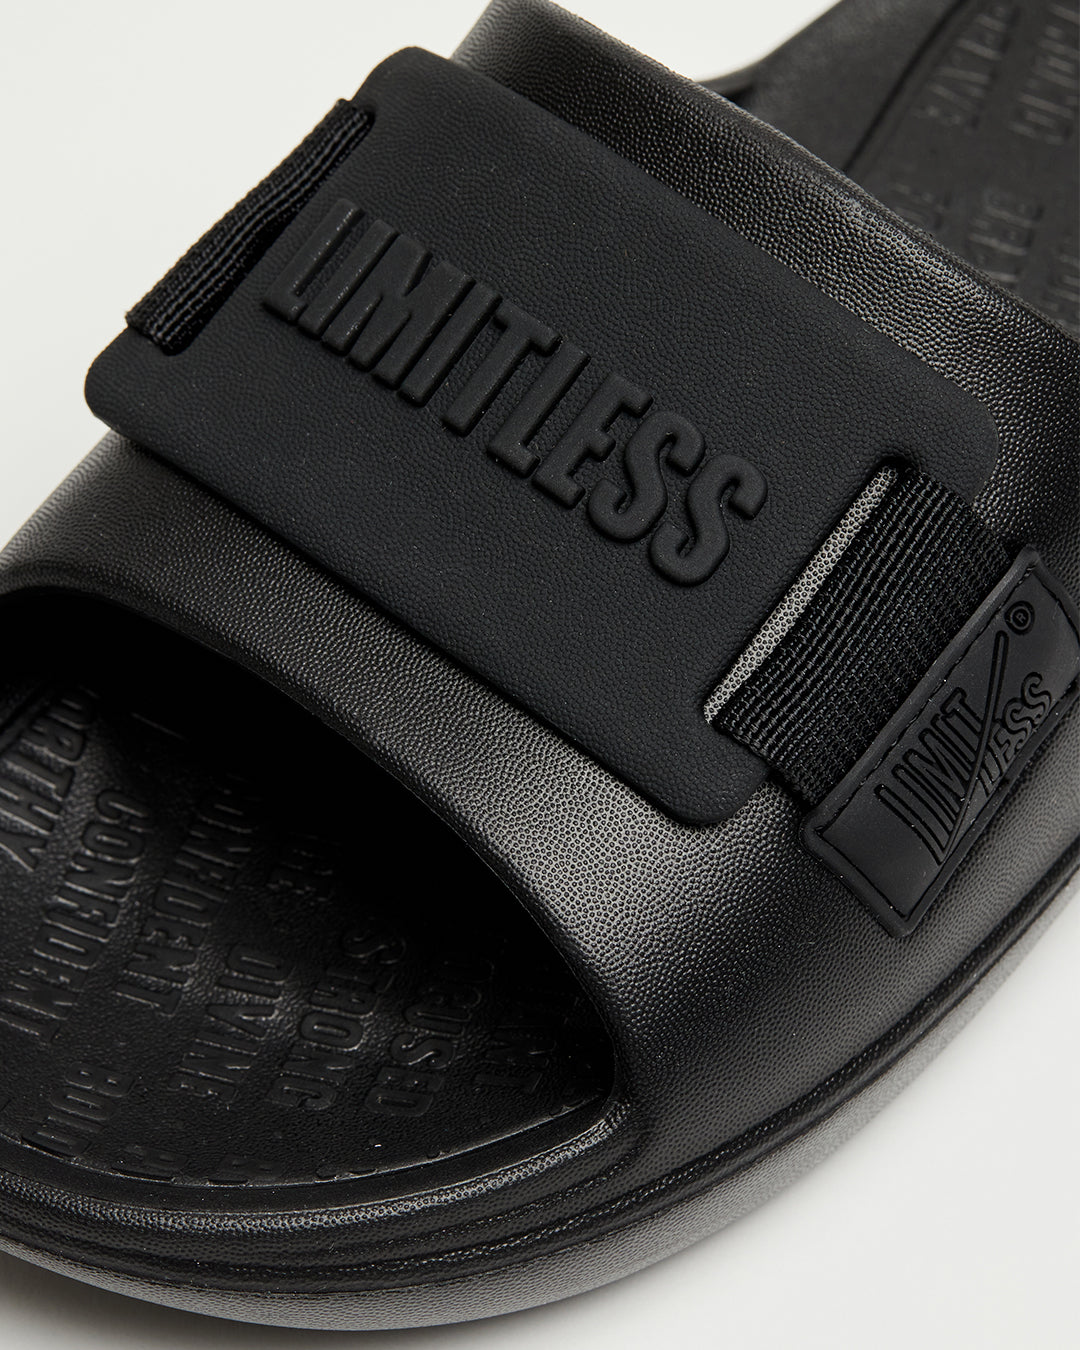 LIMITLESS SLIDES™ WITH ESSENTIAL TIBAH™ QUAD - BIXBY HIGH SCHOOL EDITION